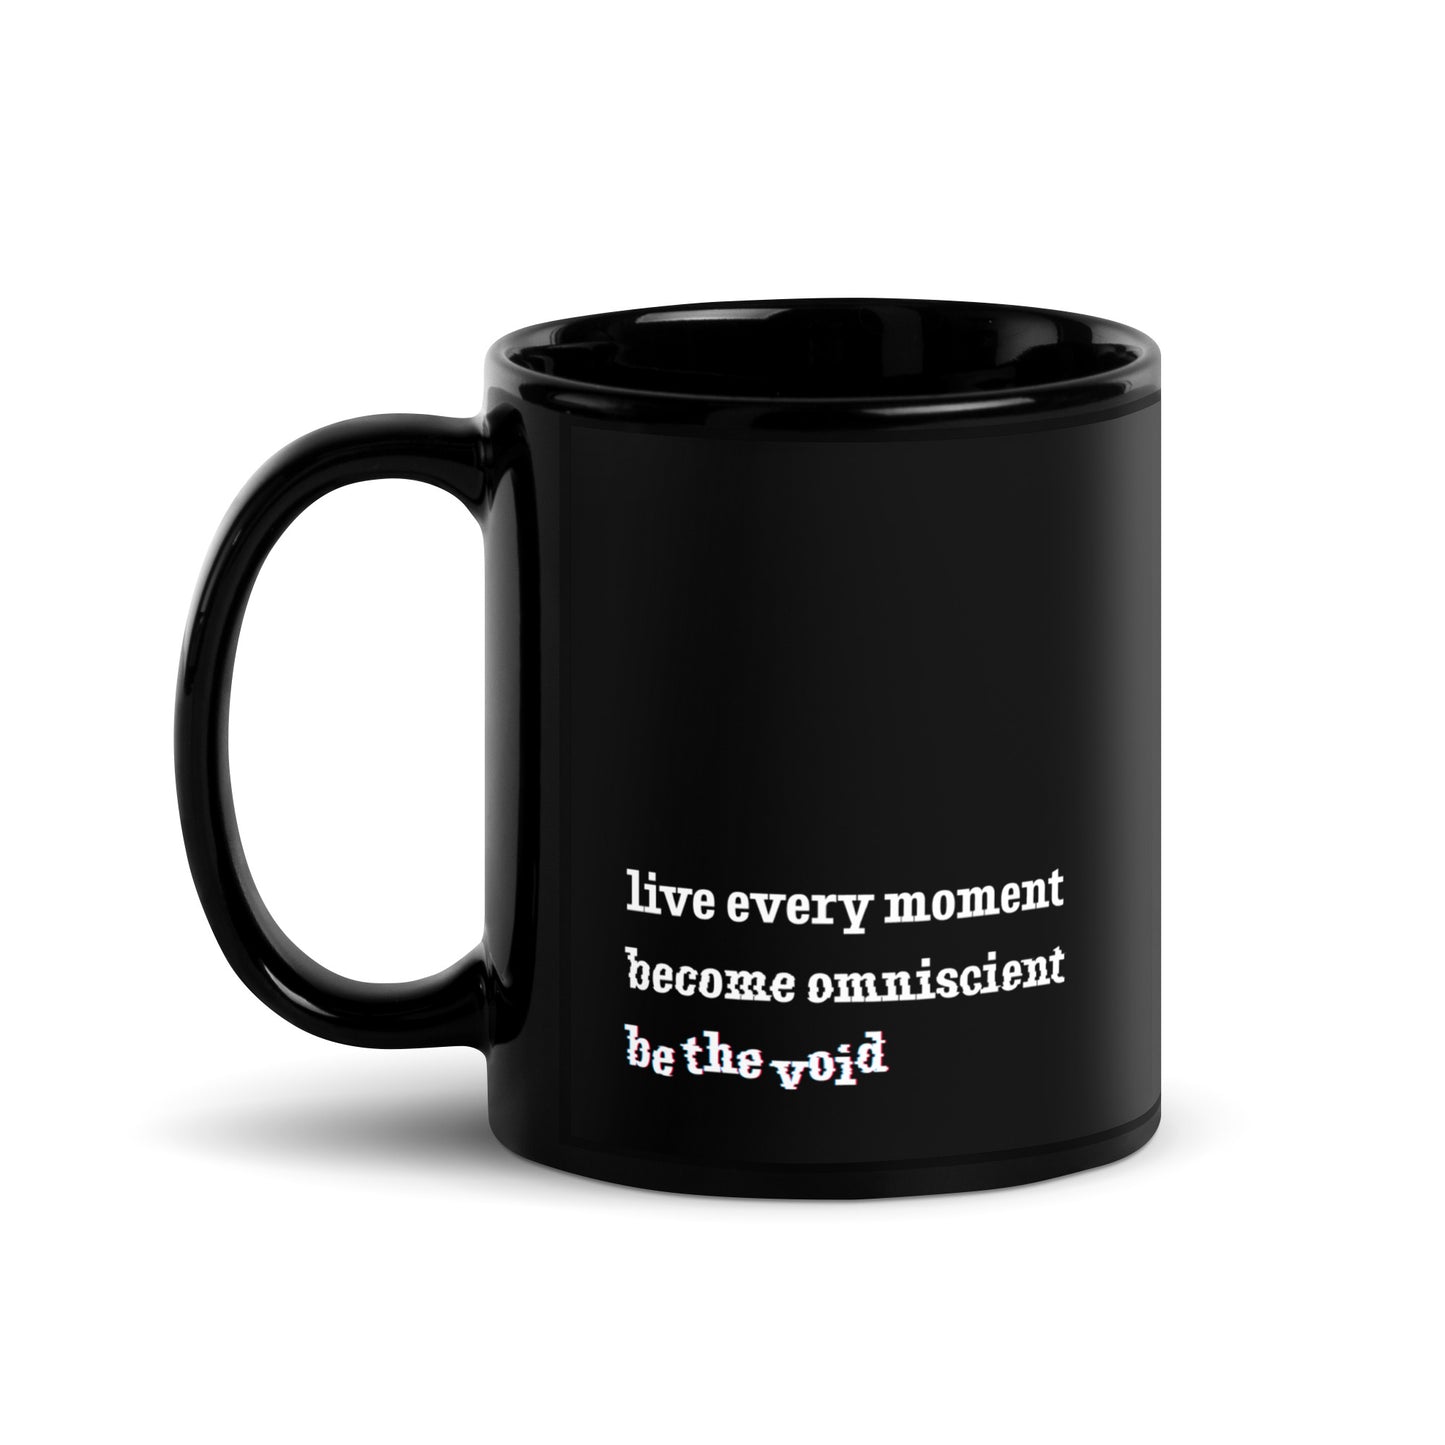 A black ceramic mug featuring white text that reads "live every moment, become omniscient, be the void" in an increasingly distorted font.